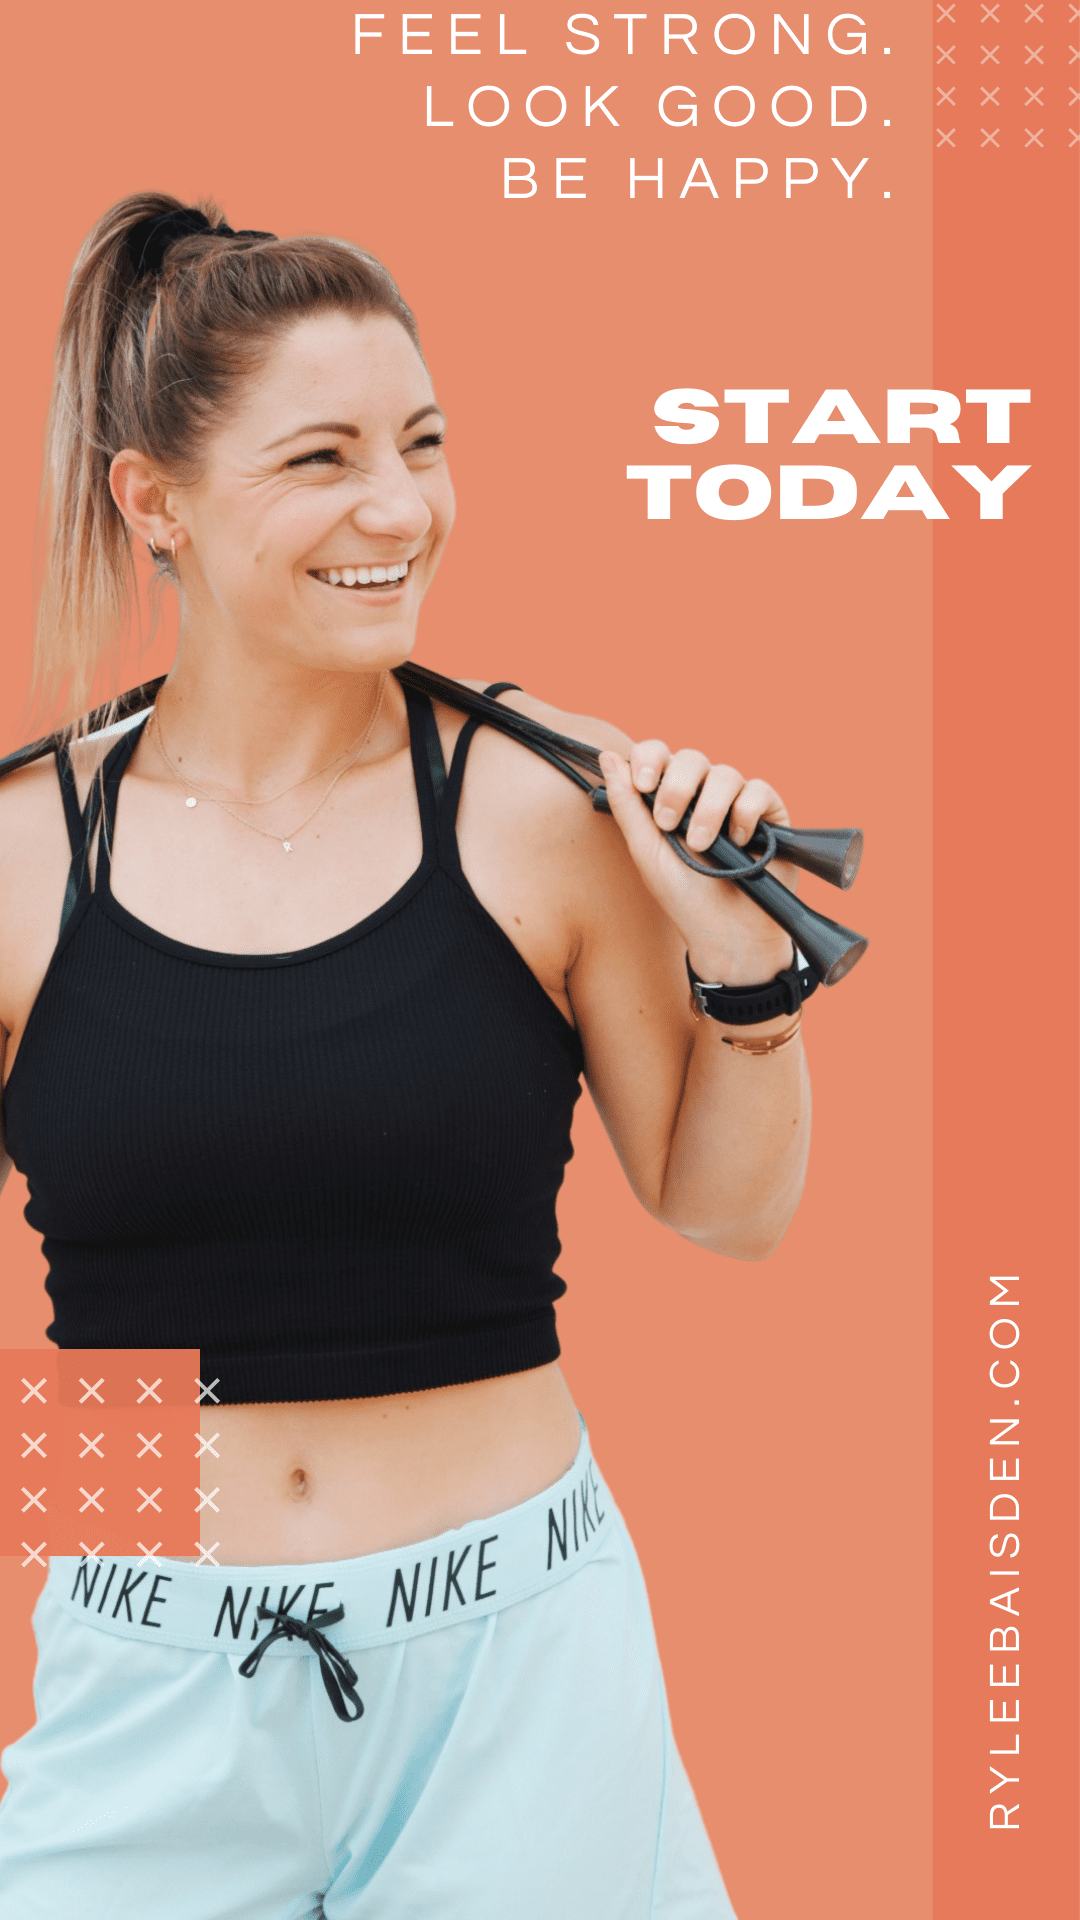 Start getting fit today